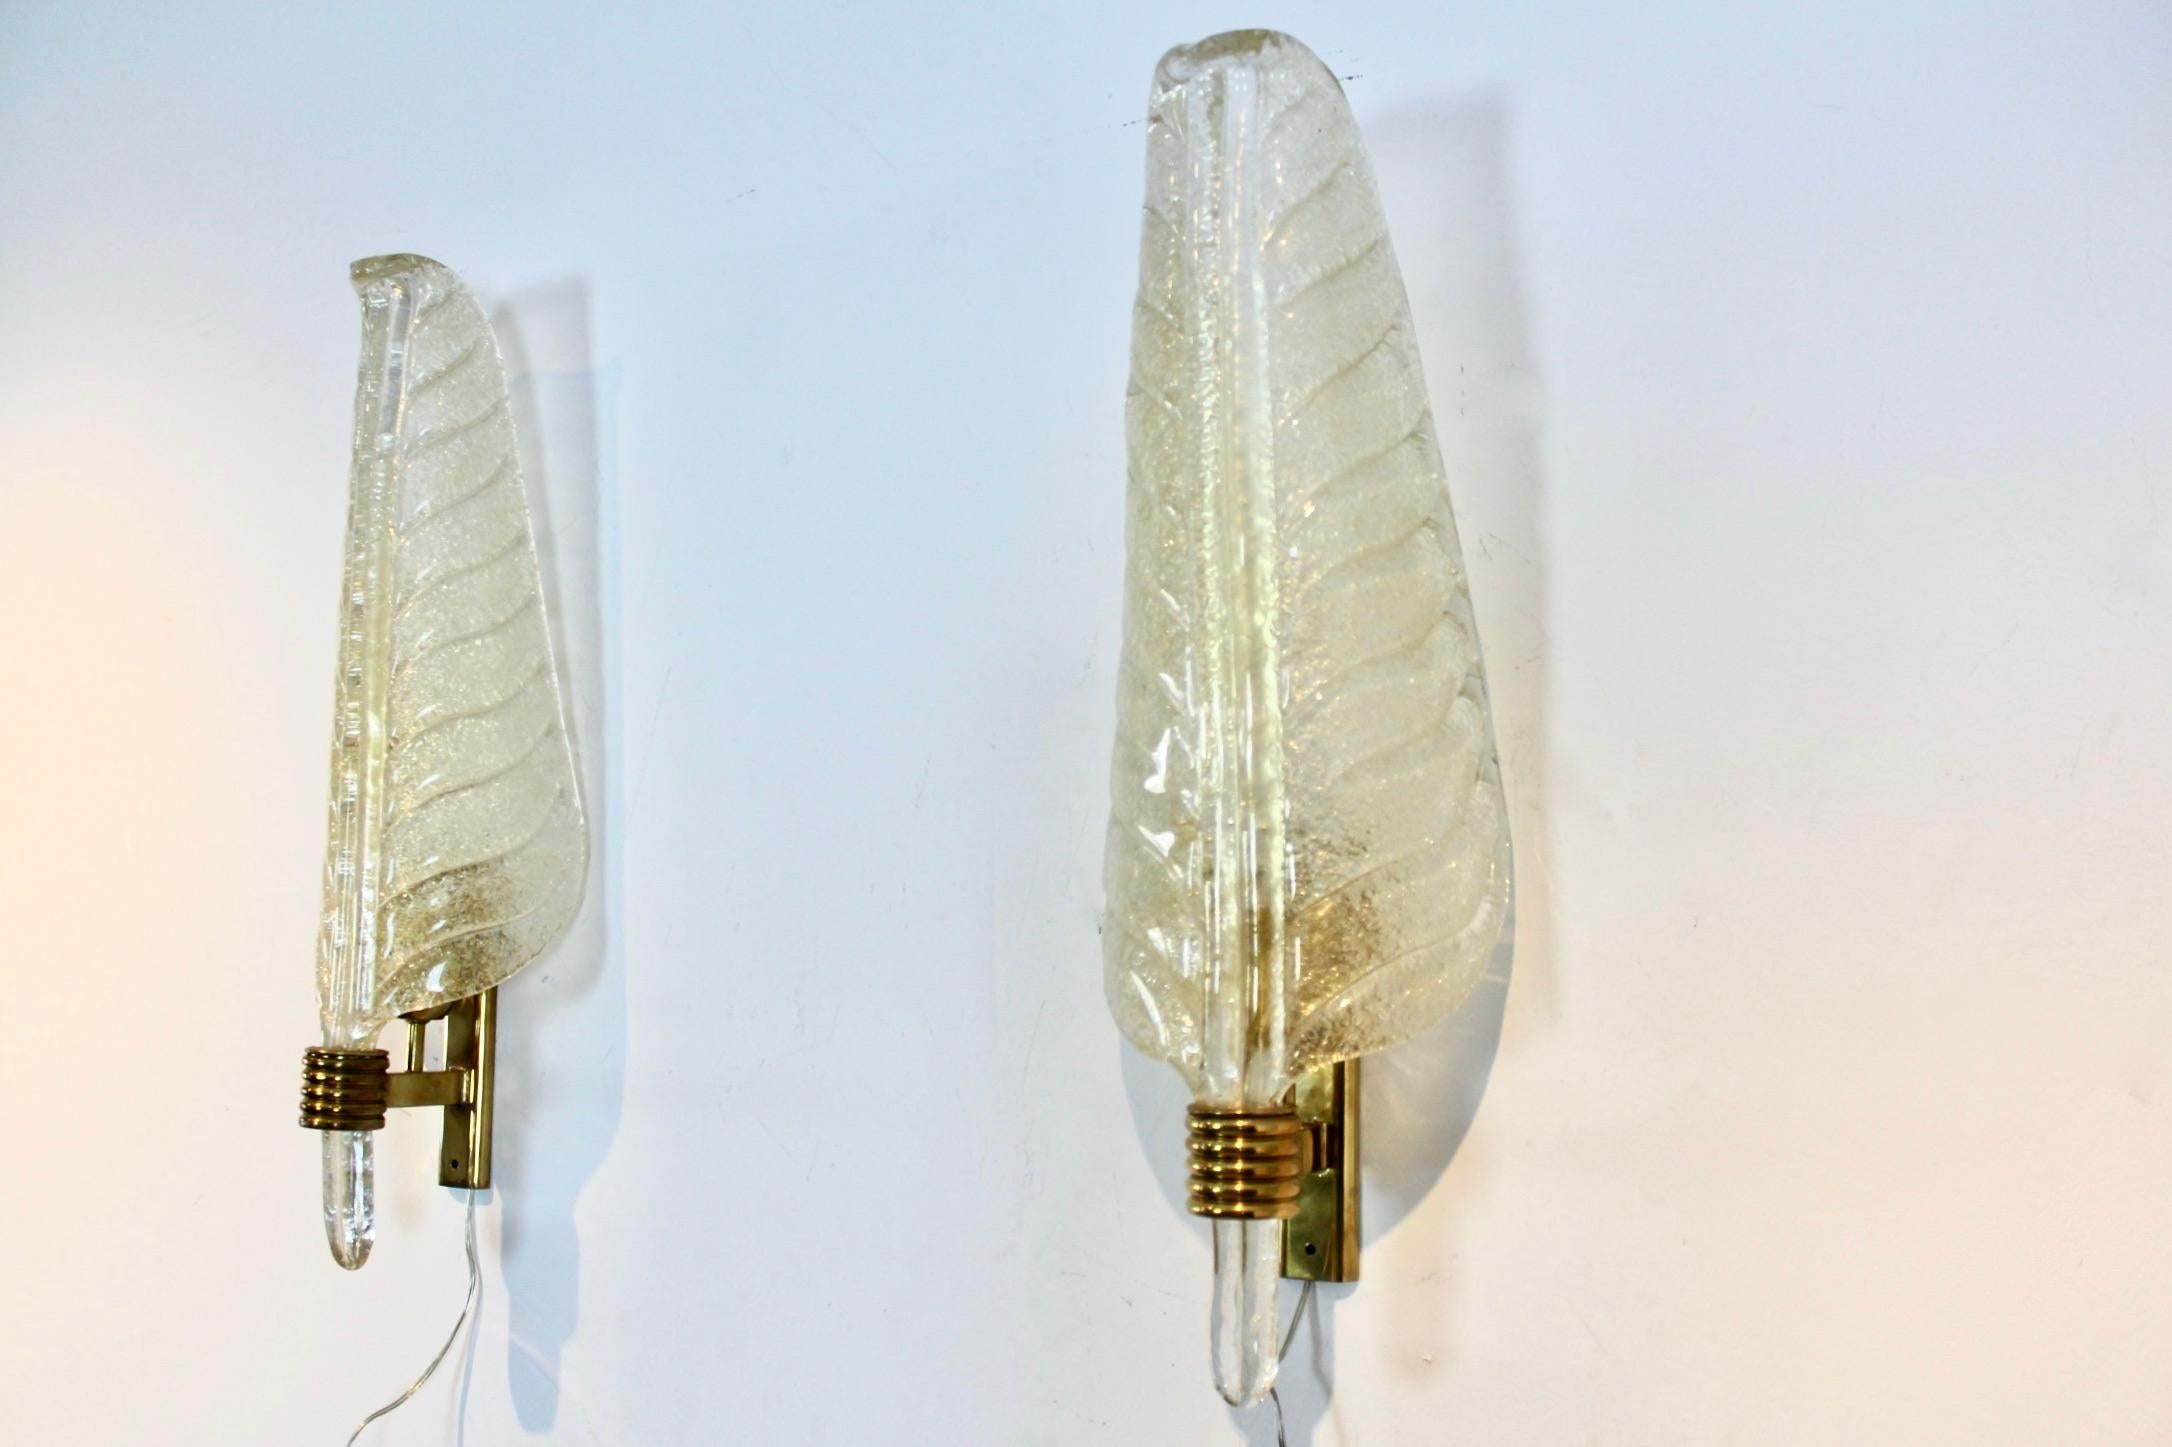 Italian Glamorous Pair of Xl Murano 24kt Gold Flaked Glass Leaf Sconces, Barovier & Toso